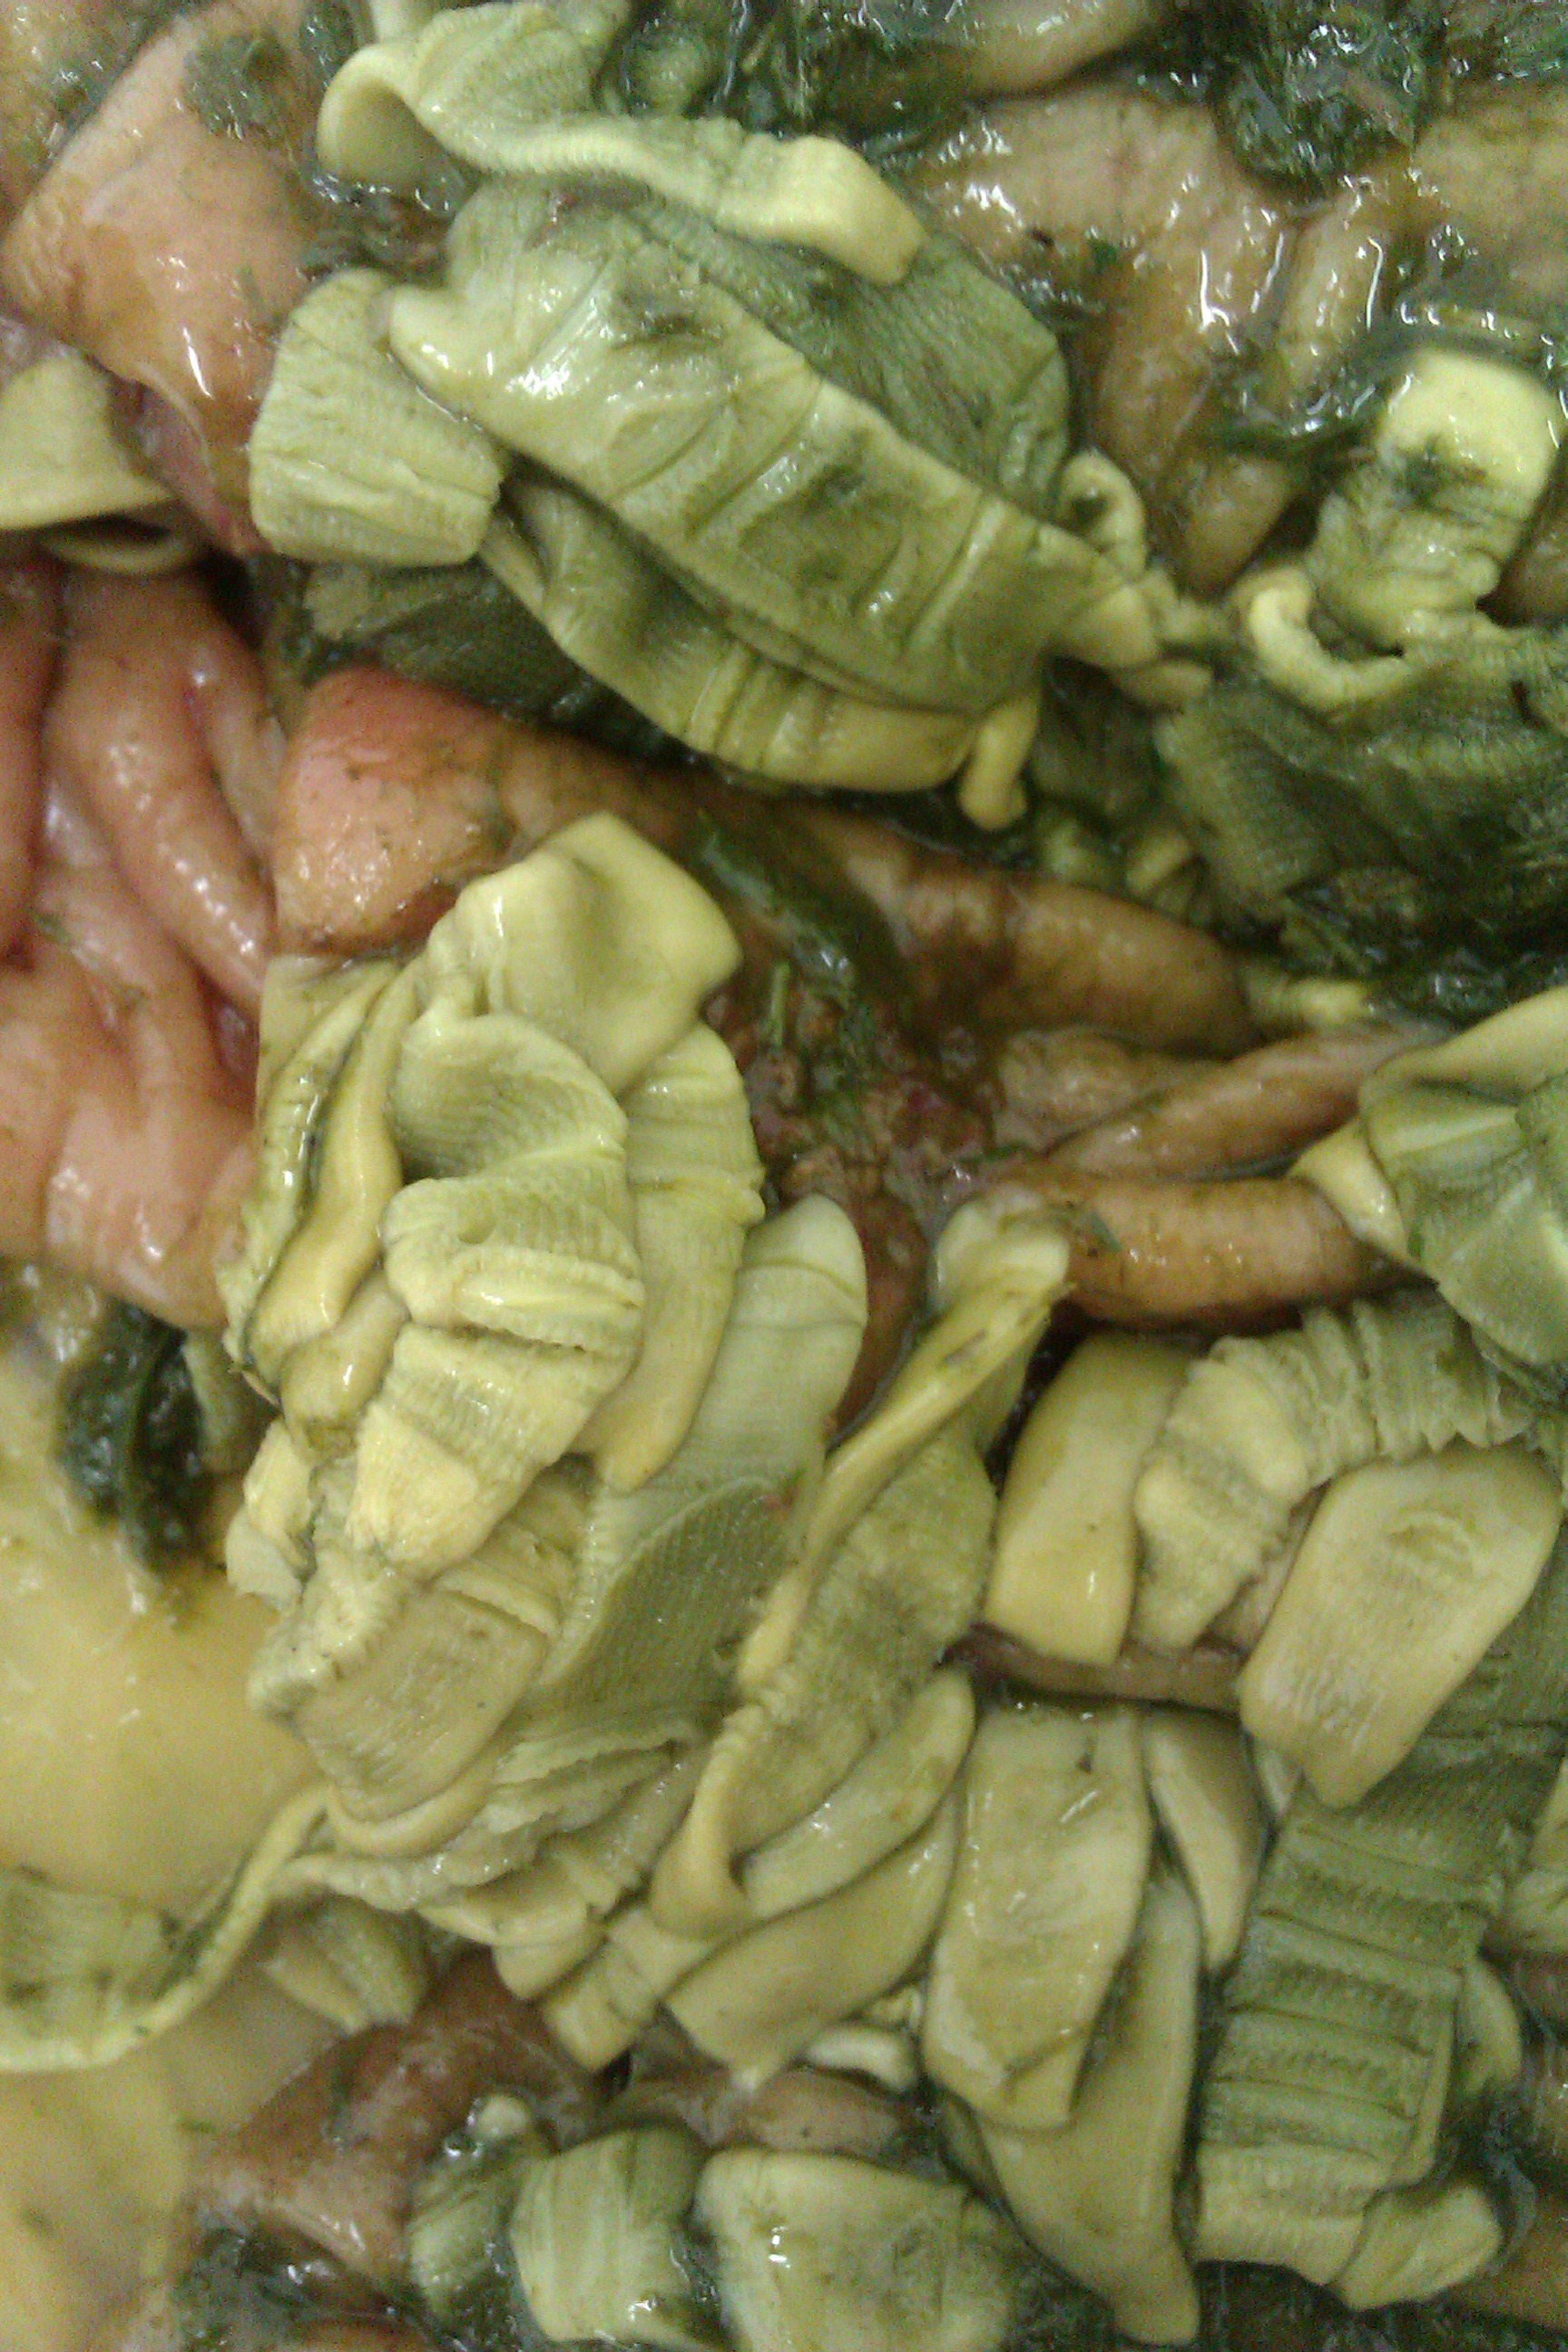 Tapeworm in the horse's gut